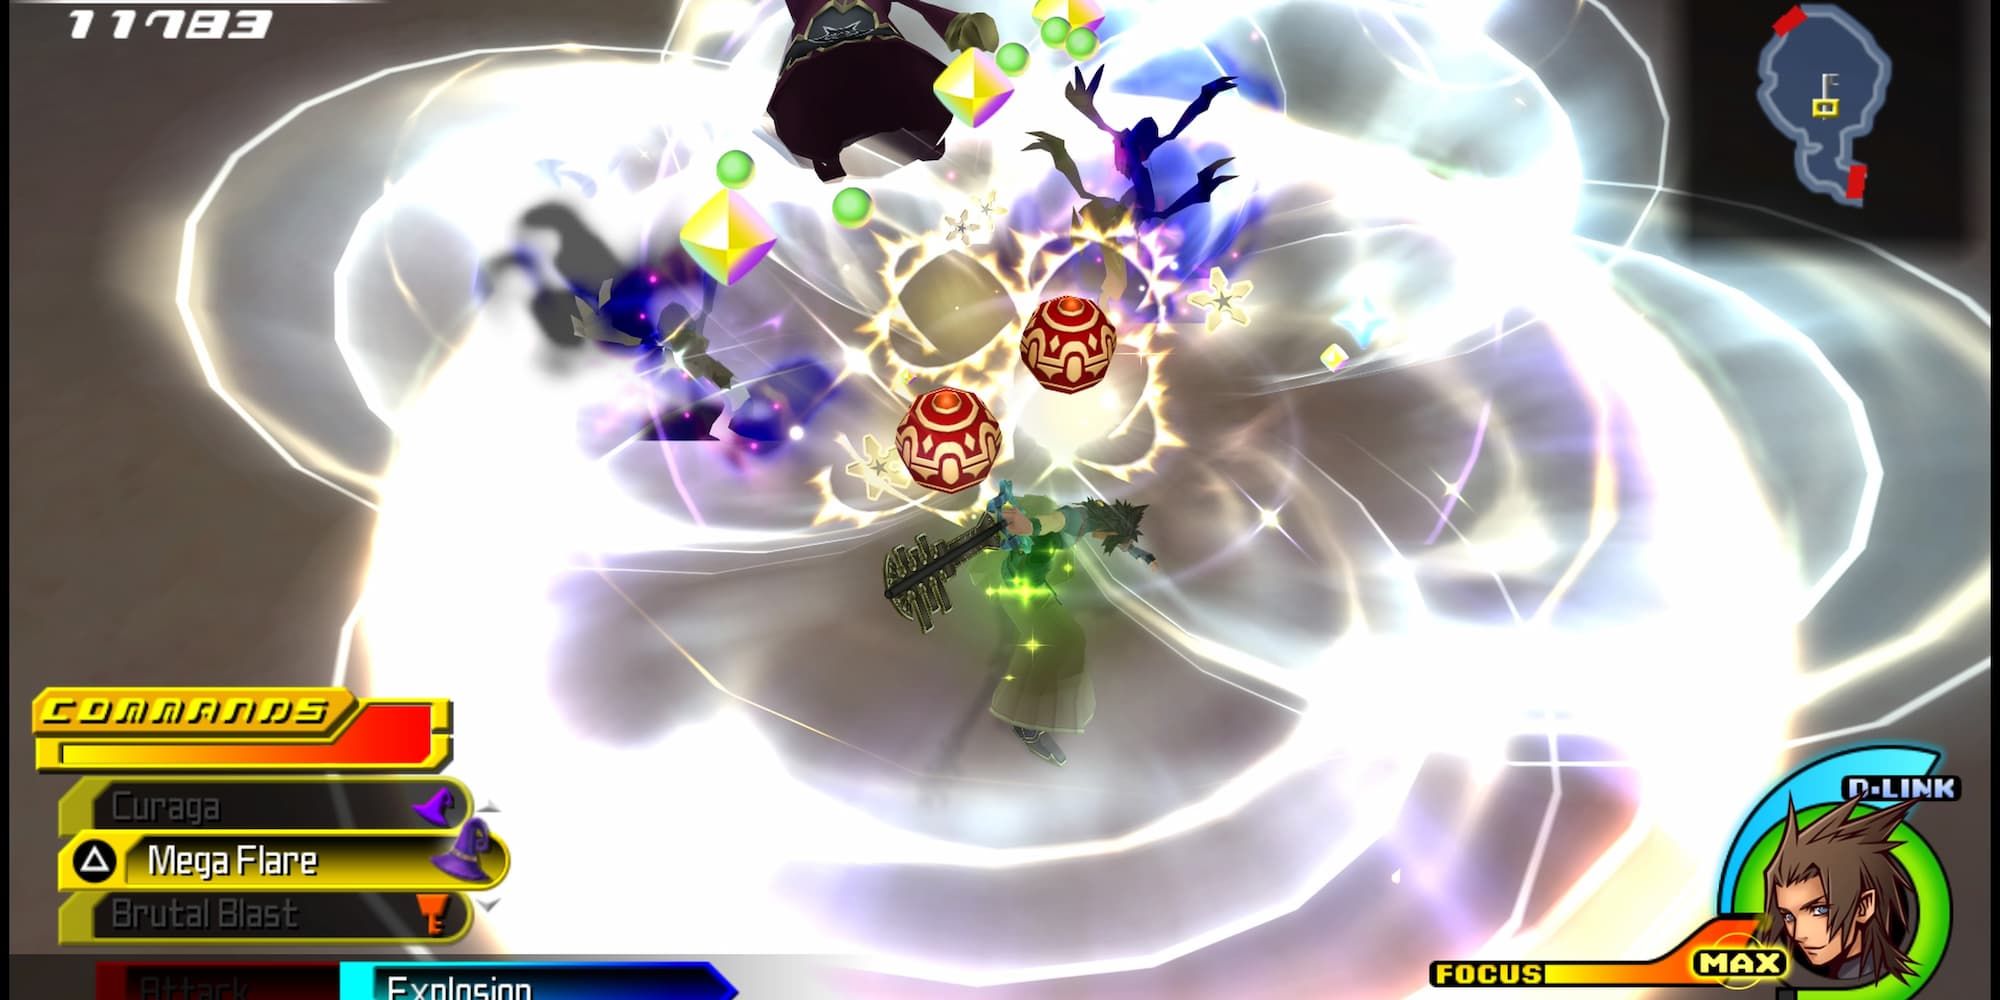 Three Unversed being defeated by Explosion